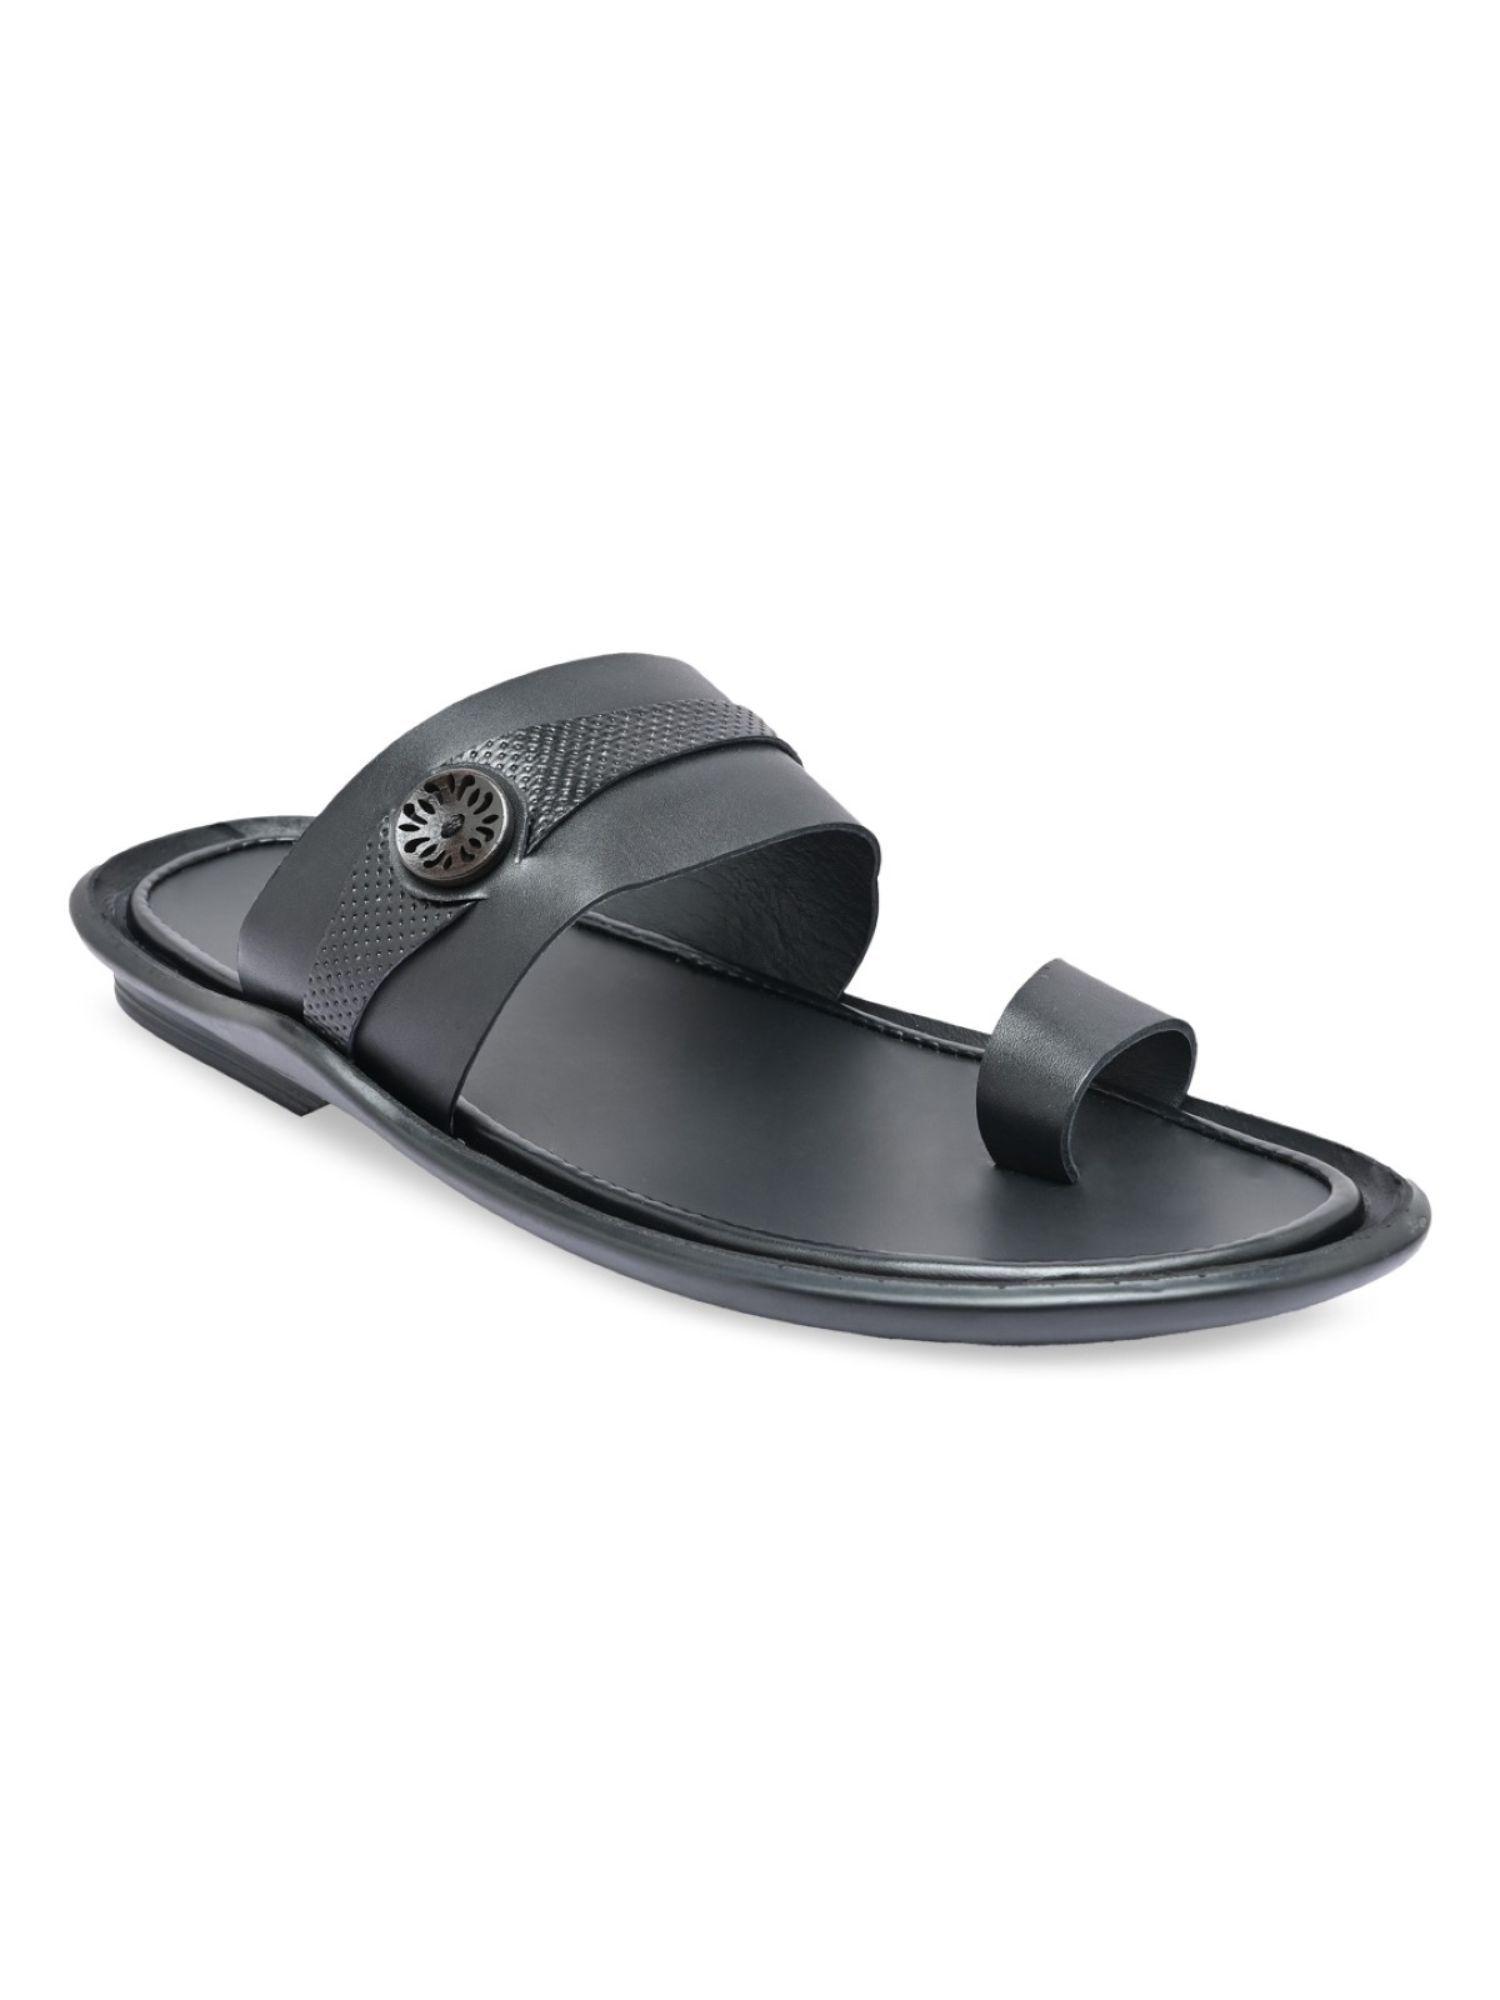 men-black-solid-casual-leather-sandals